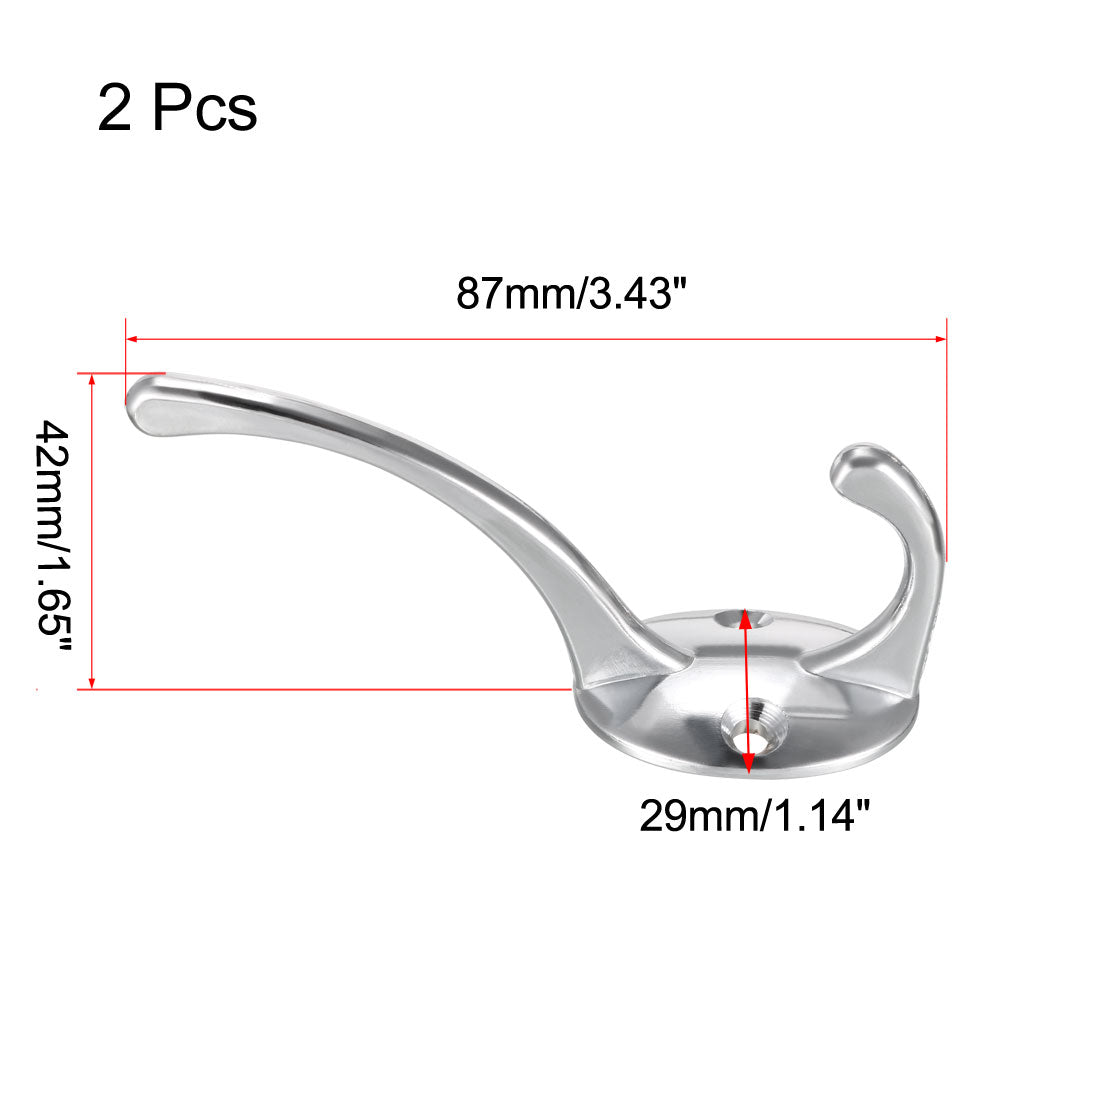 uxcell Uxcell Dual Prong Coat Hooks Wall Mounted Retro Double Hooks Utility Silver Hook for Coat Scarf Bag Towel Key Cap Cup Hat 87mm x 29mm x 42mm 2pcs